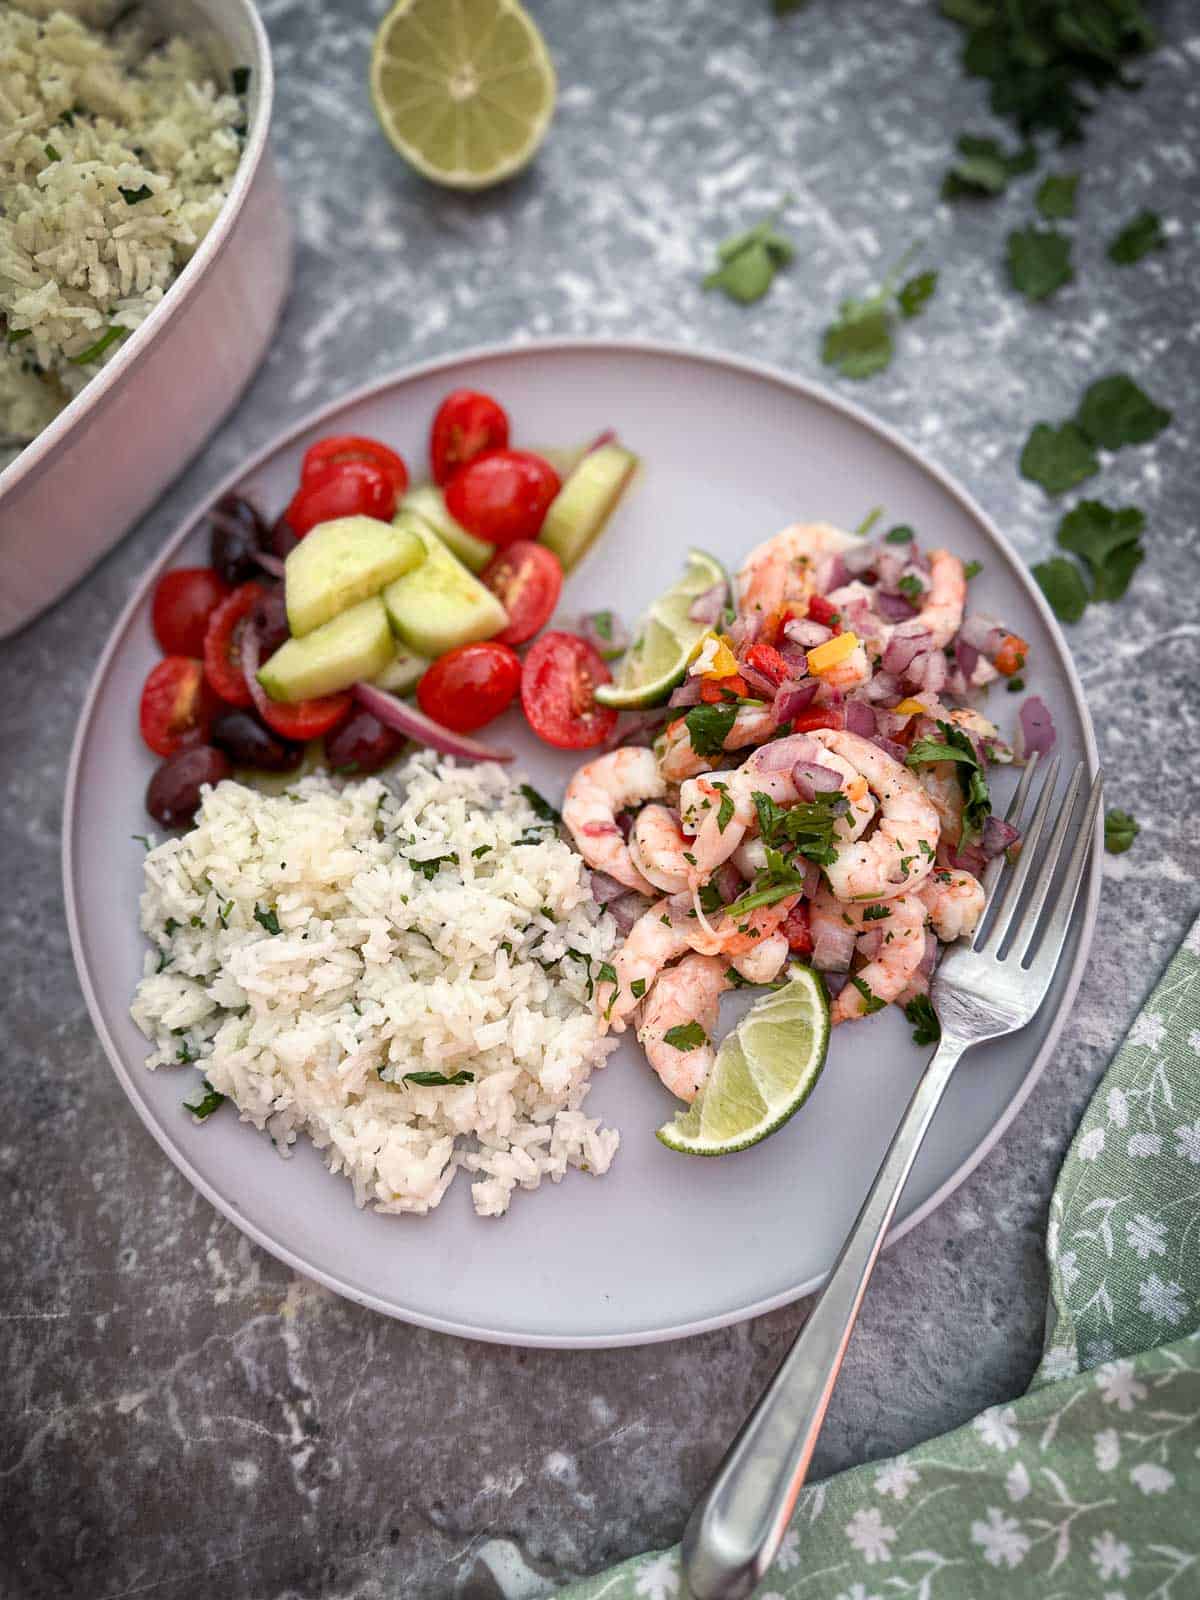 A plate shown with cilantro, lime rice, a tomato and cucumber salad and some shrimp ceviche.